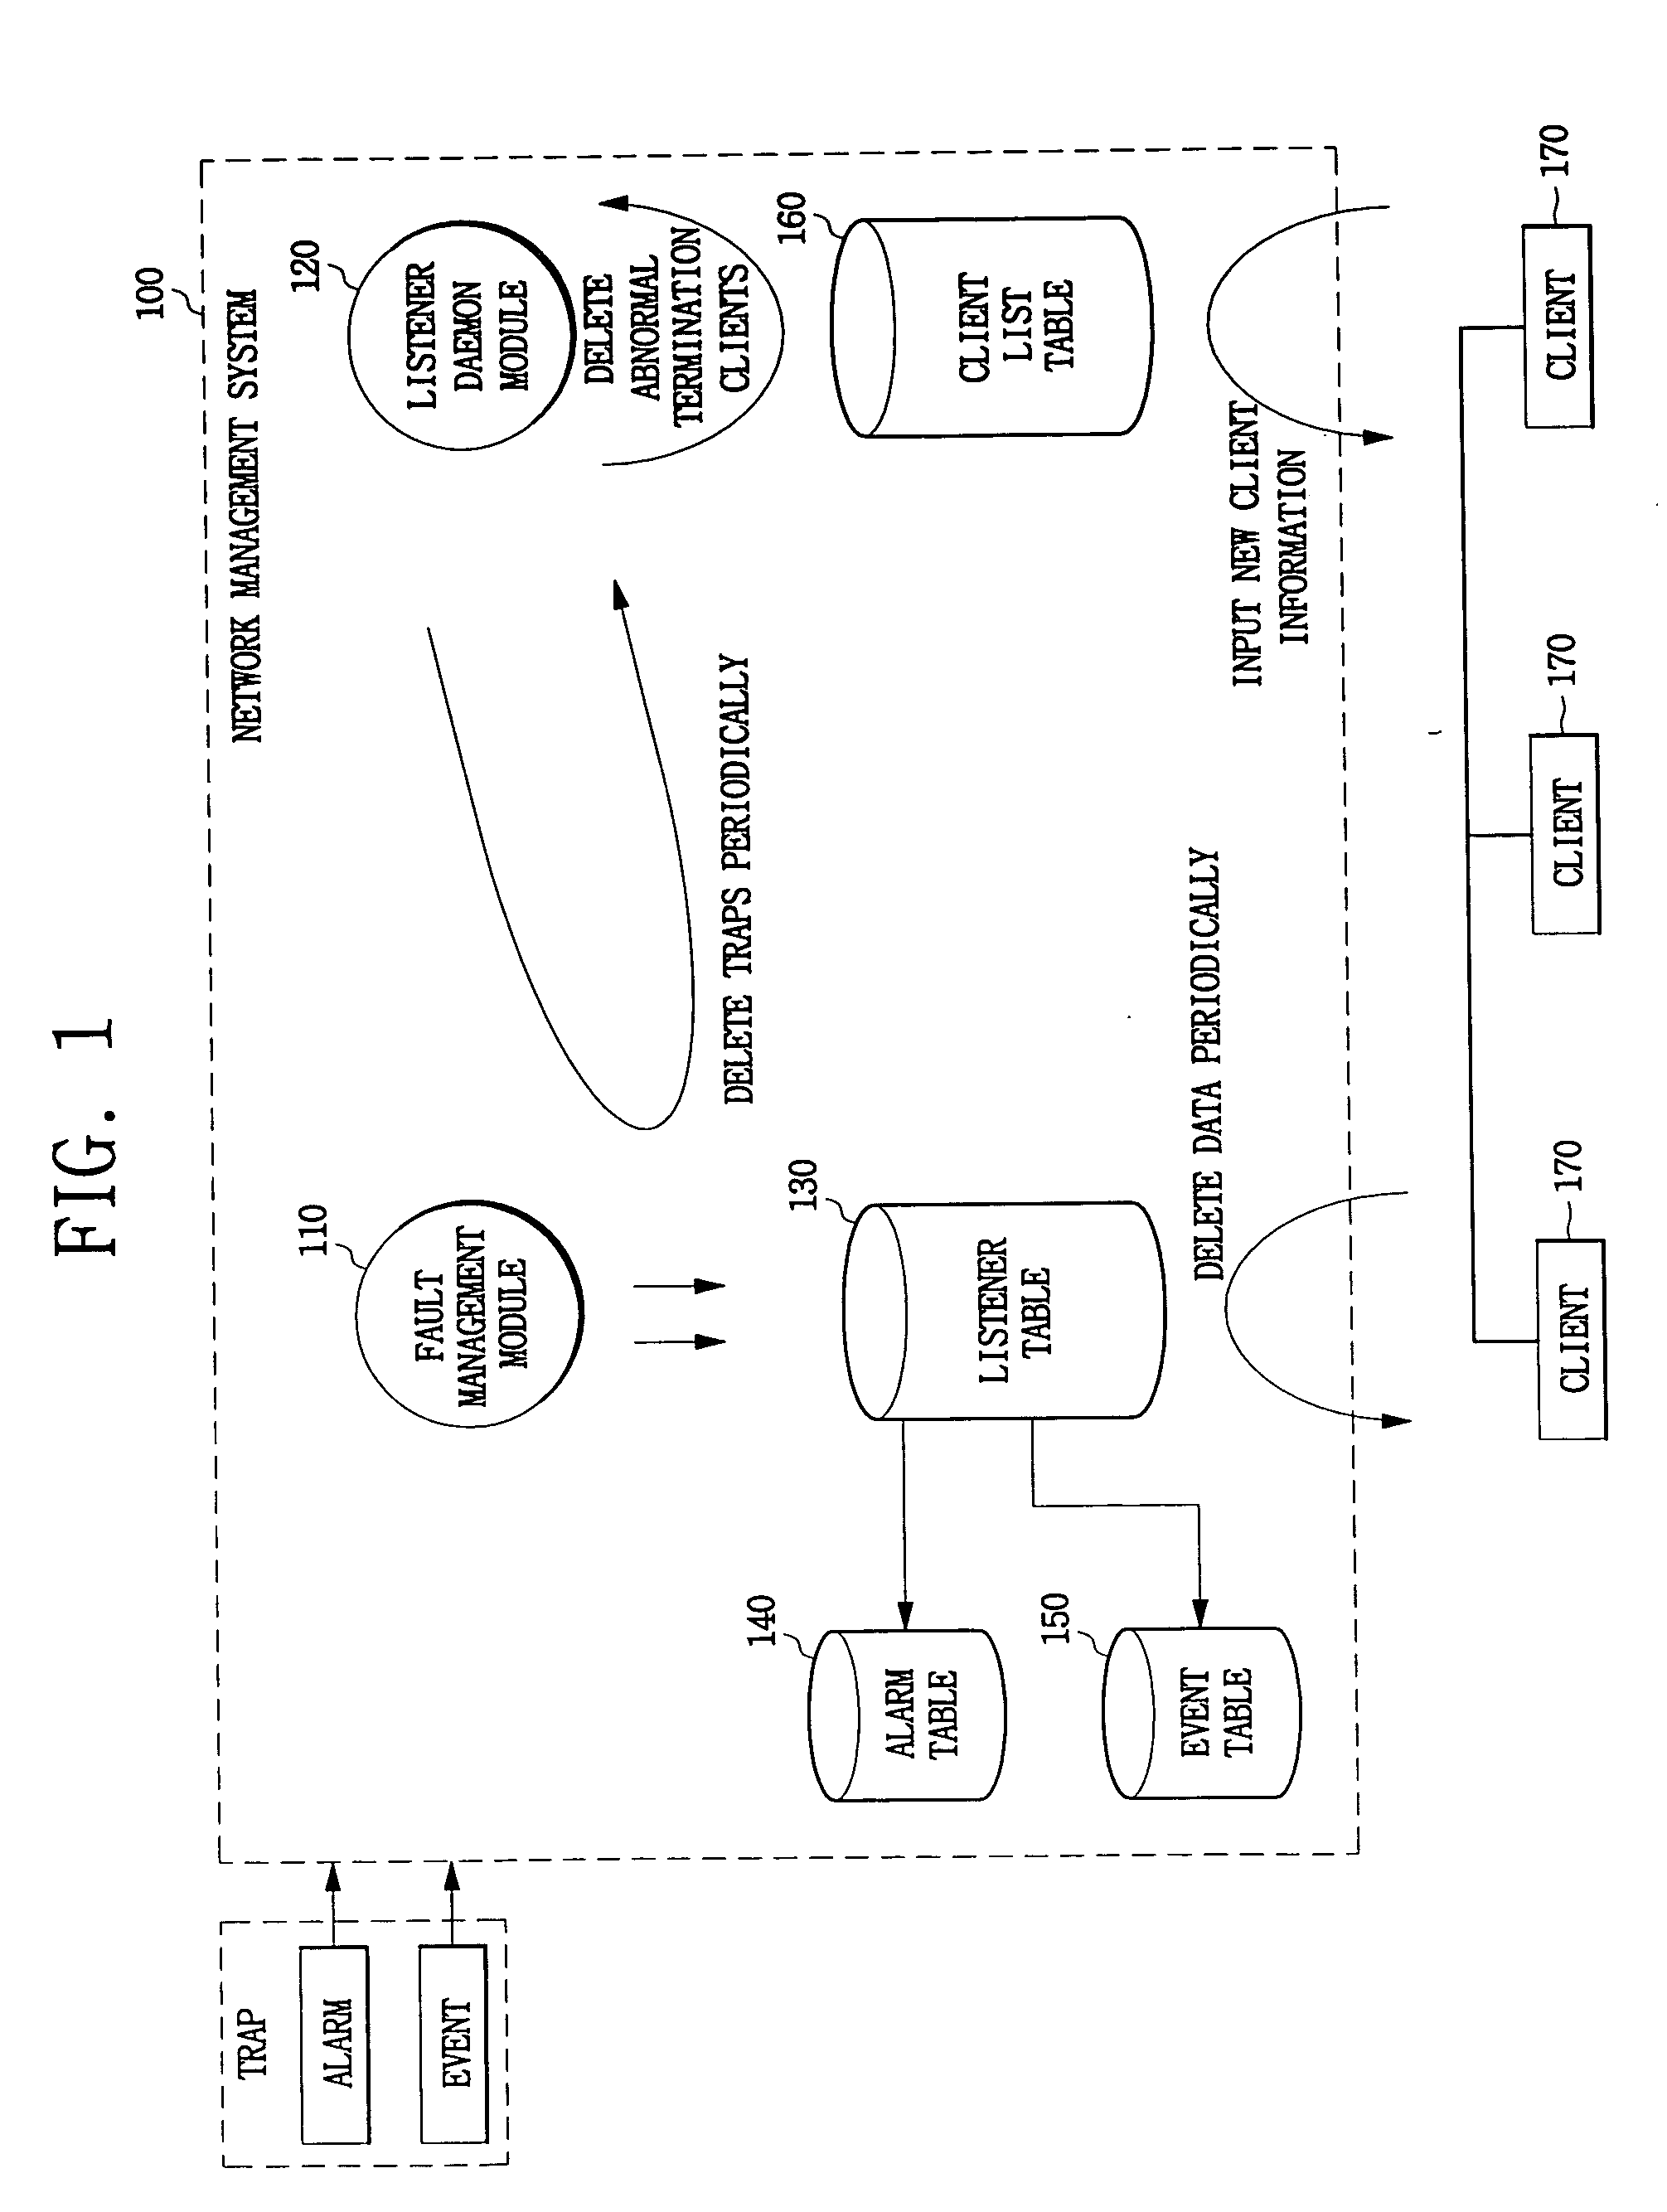 Method and system for processing fault information in NMS